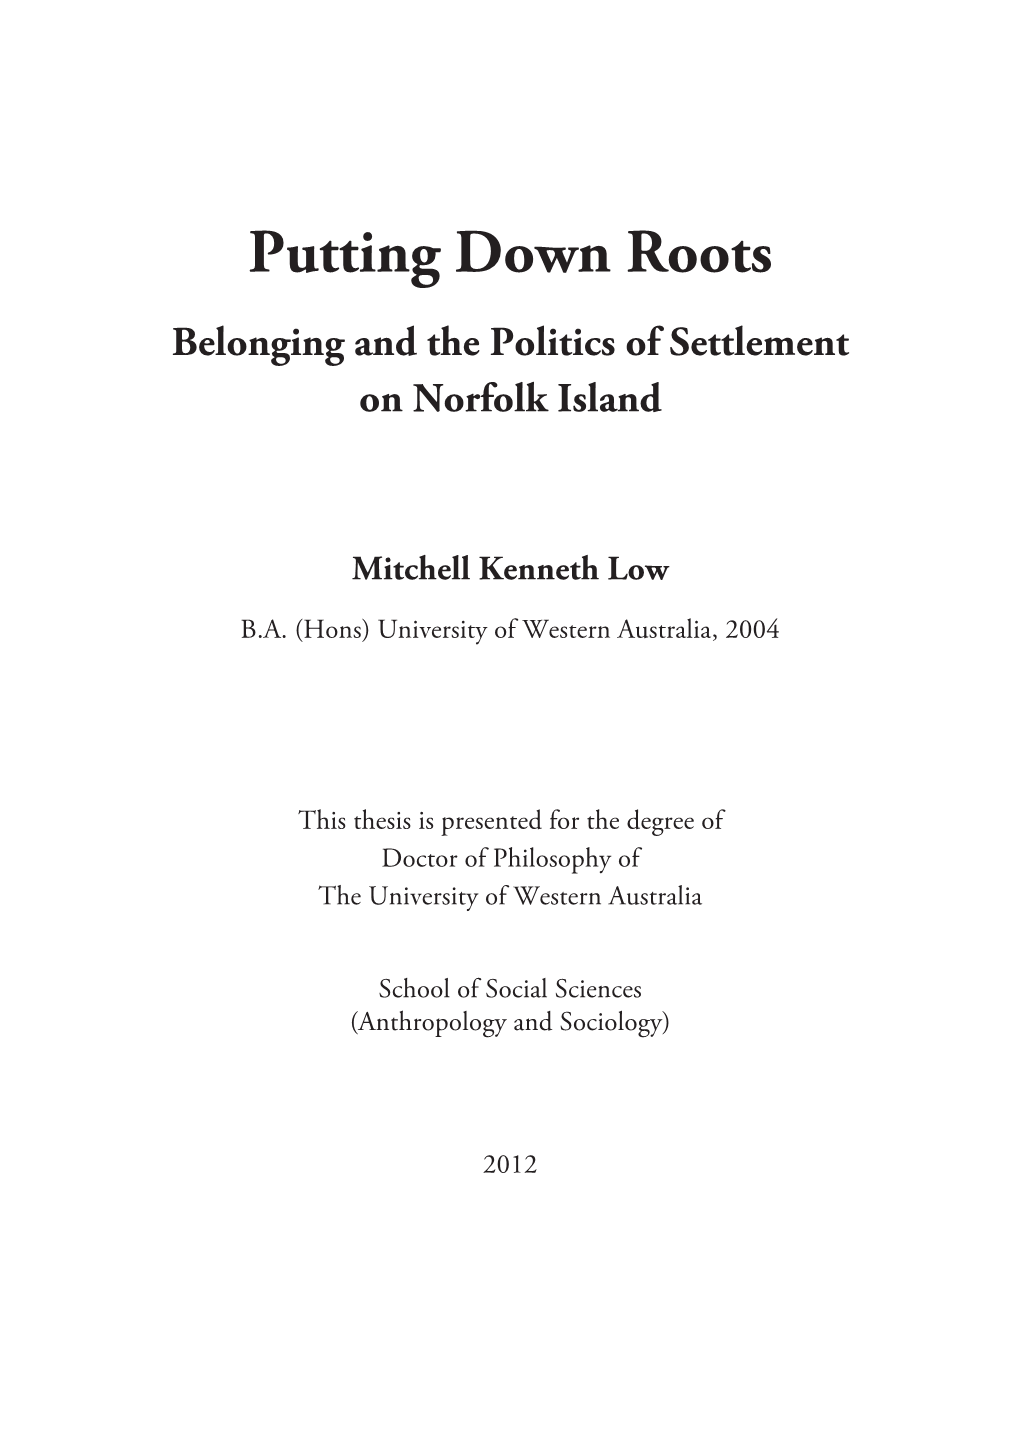 Putting Down Roots Belonging and the Politics of Settlement on Norfolk Island